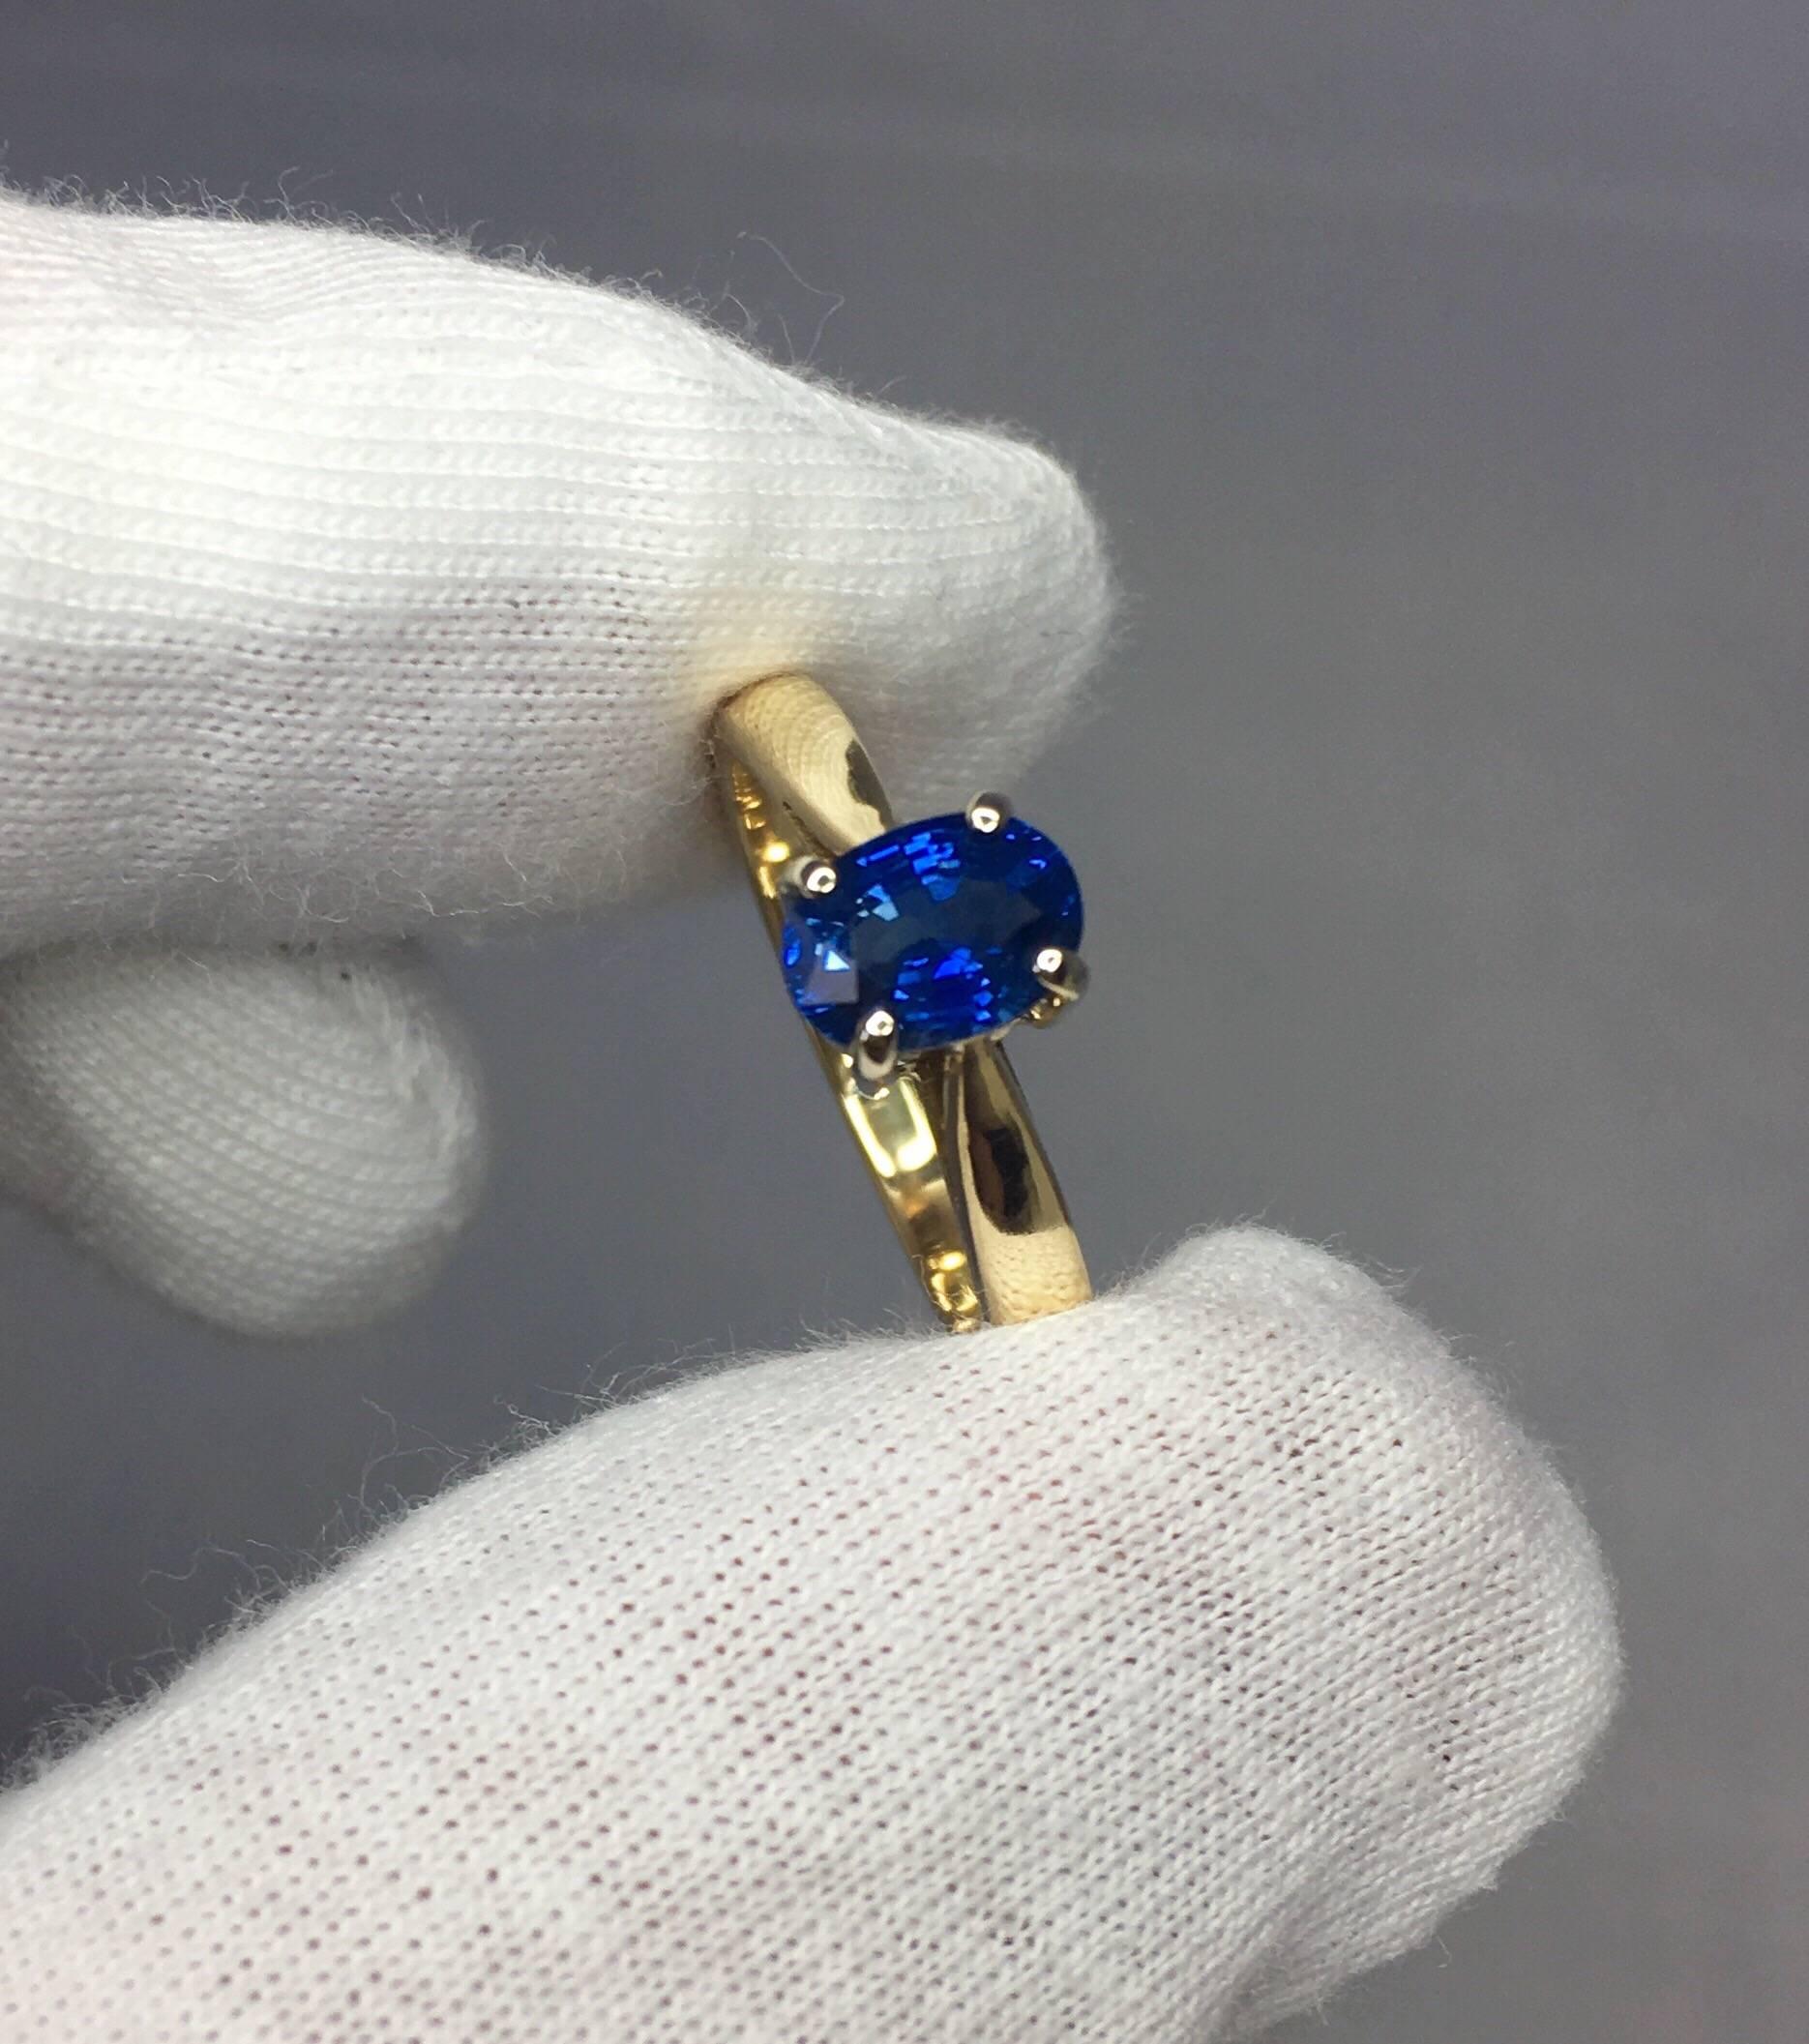 Stunning natural vivid 'cornflower' blue ceylon sapphire set in a beautiful 18k multi-tone gold solitaire ring. 

1.15 carat stone with a stunning cornflower blue colour and excellent clarity. Superb quality stone.
Also has an excellent oval cut